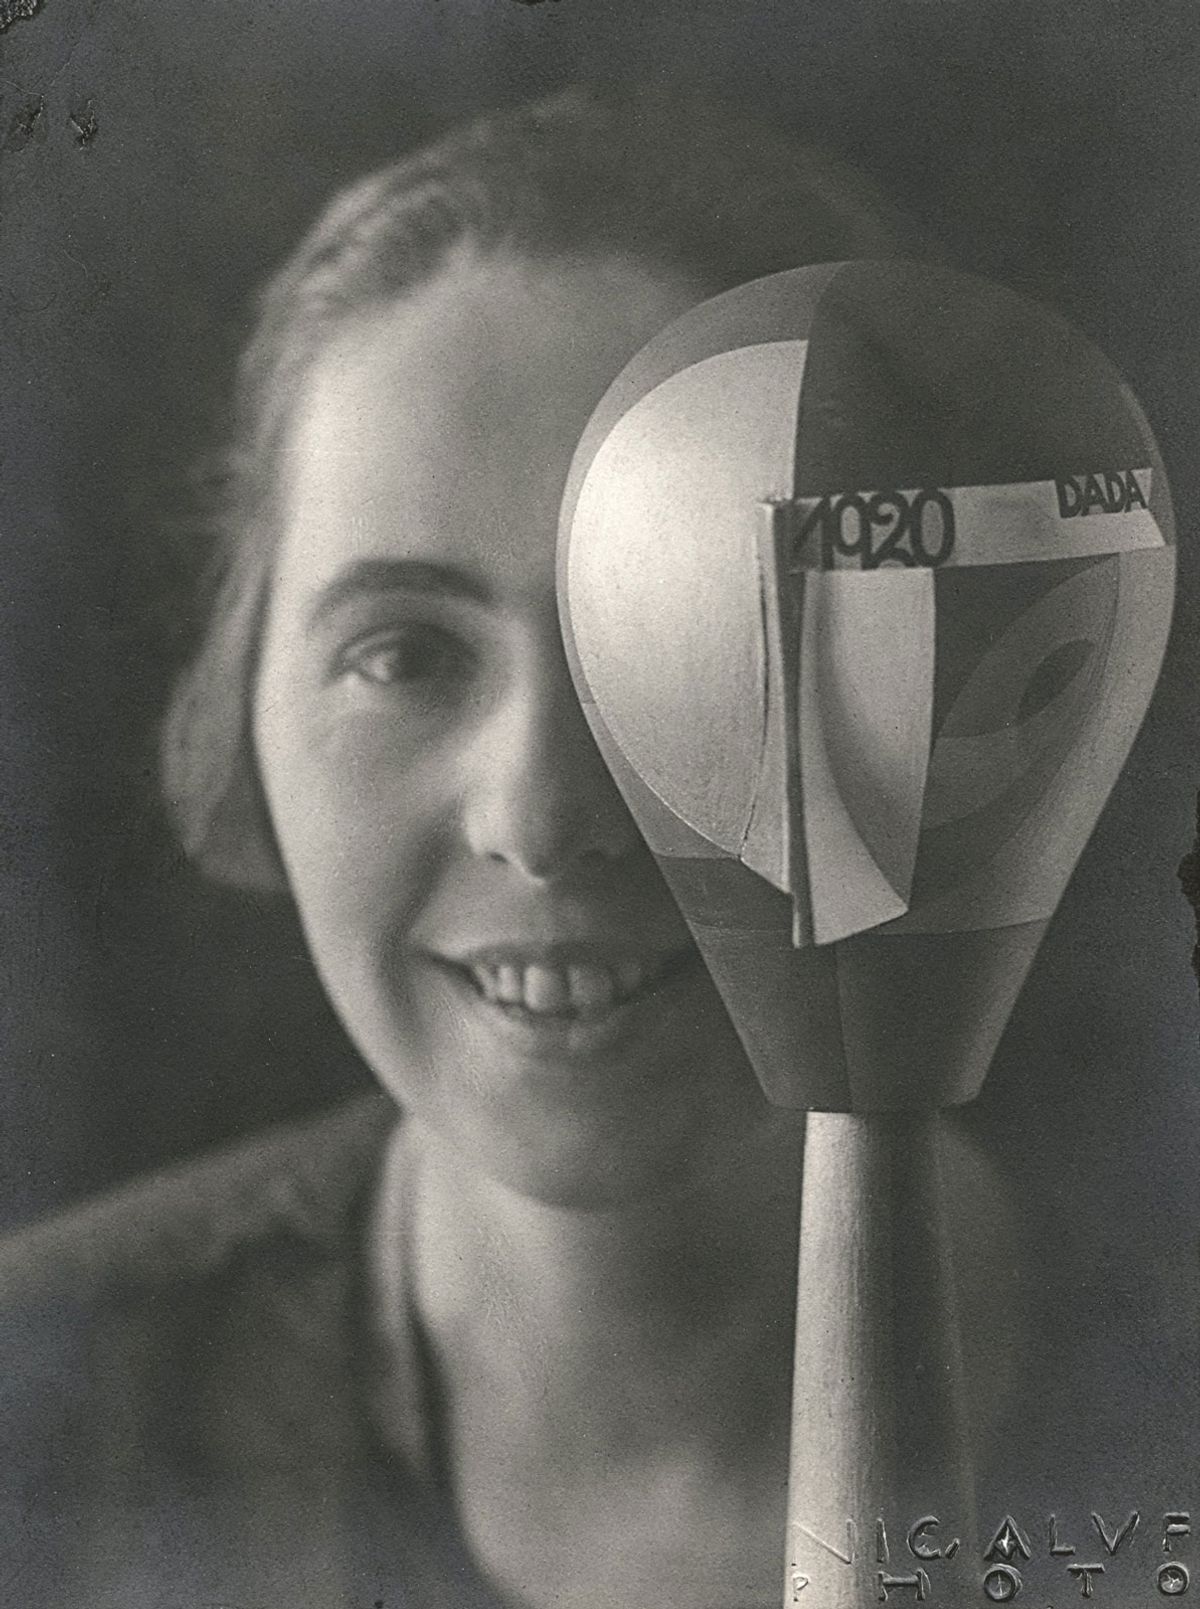 Sophie Taeuber-Arp with her Dada head sculpture, photographed by Nicolai Aluf in 1920 Stiftung Arp e.V., Berlin